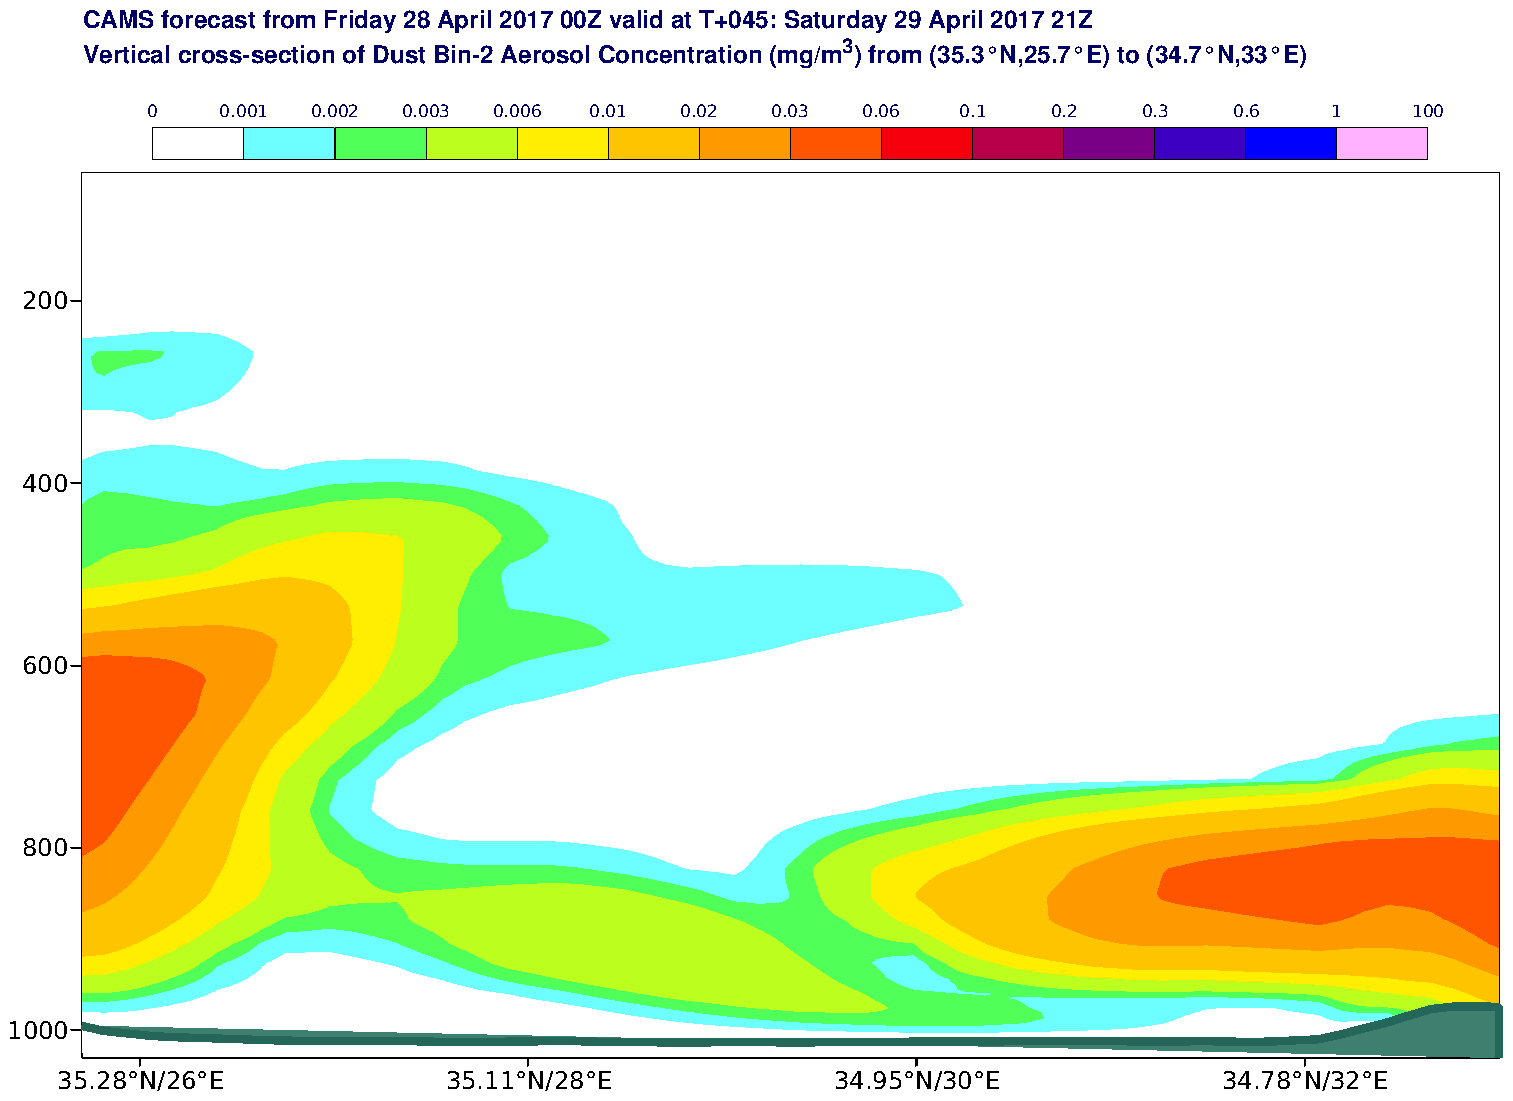 Vertical cross-section of Dust Bin-2 Aerosol Concentration (mg/m3) valid at T45 - 2017-04-29 21:00